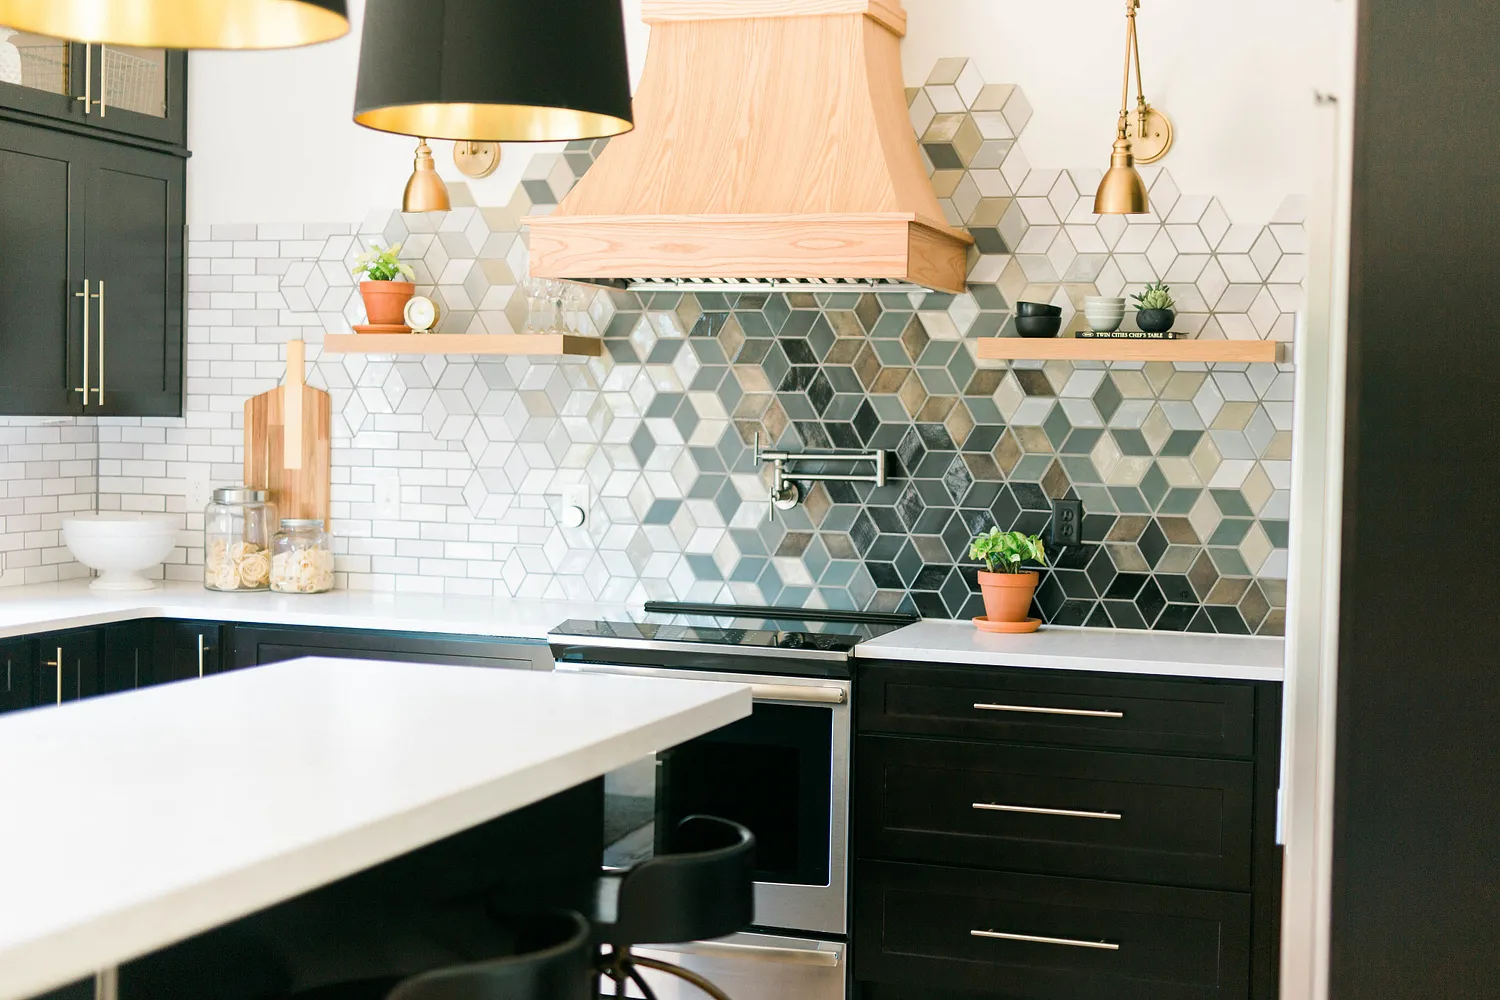 5 Countertop And Backsplash Ideas To Make A Statement In Your Kitchen  Remodel | Cambria® Quartz Surfaces - Cambria® Quartz Surfaces